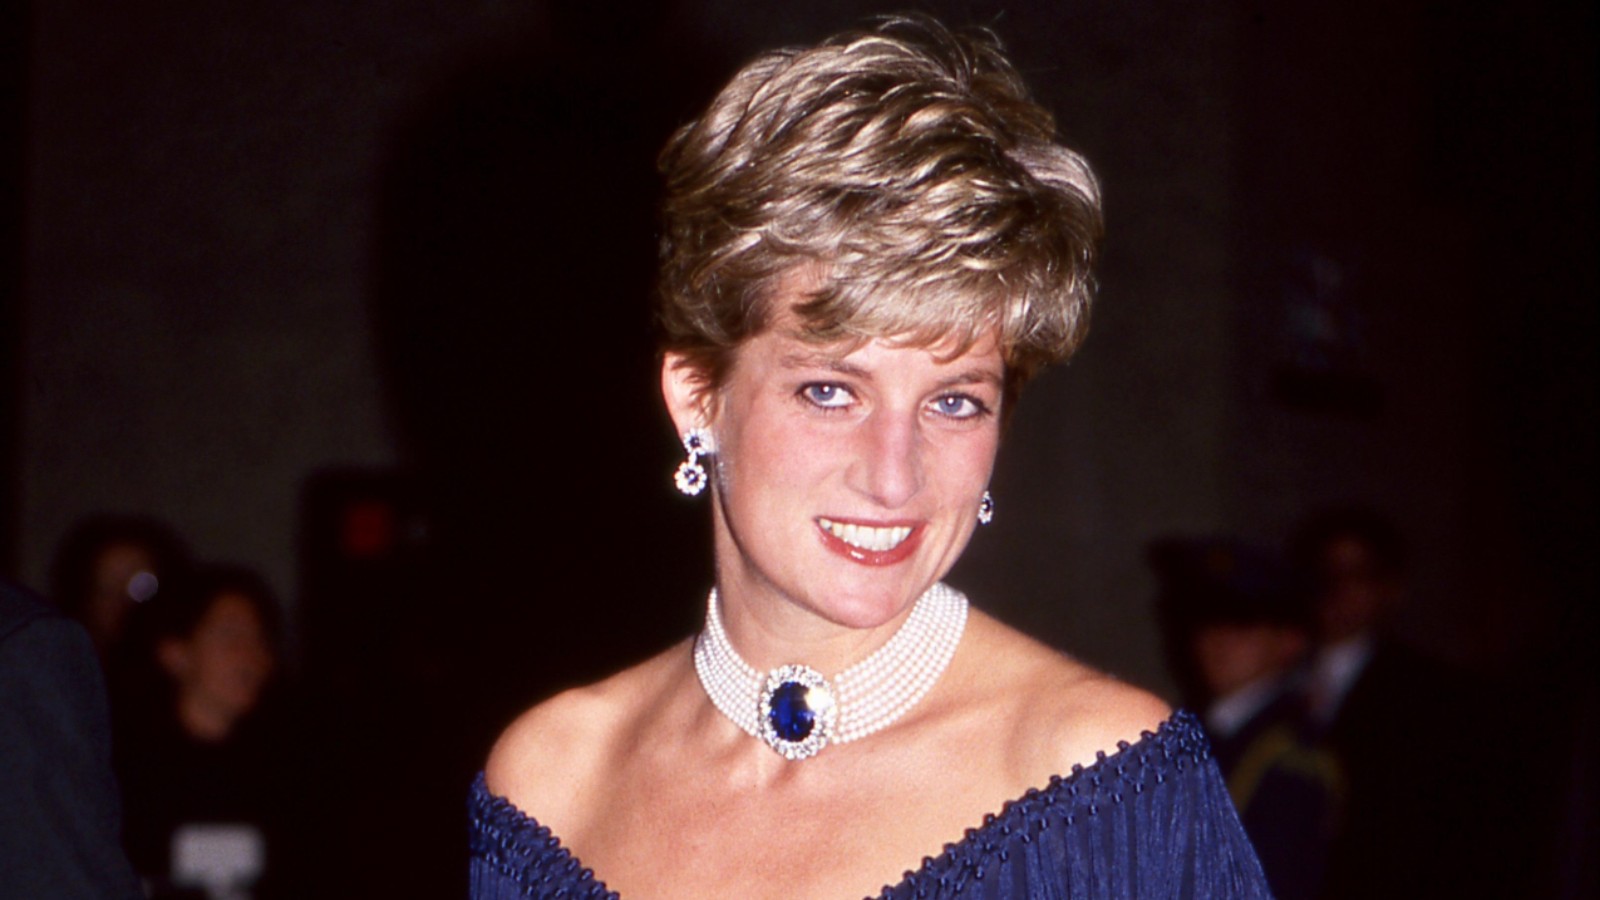 Why Did Princess Diana Have That Feathery Mushroom Haircut?